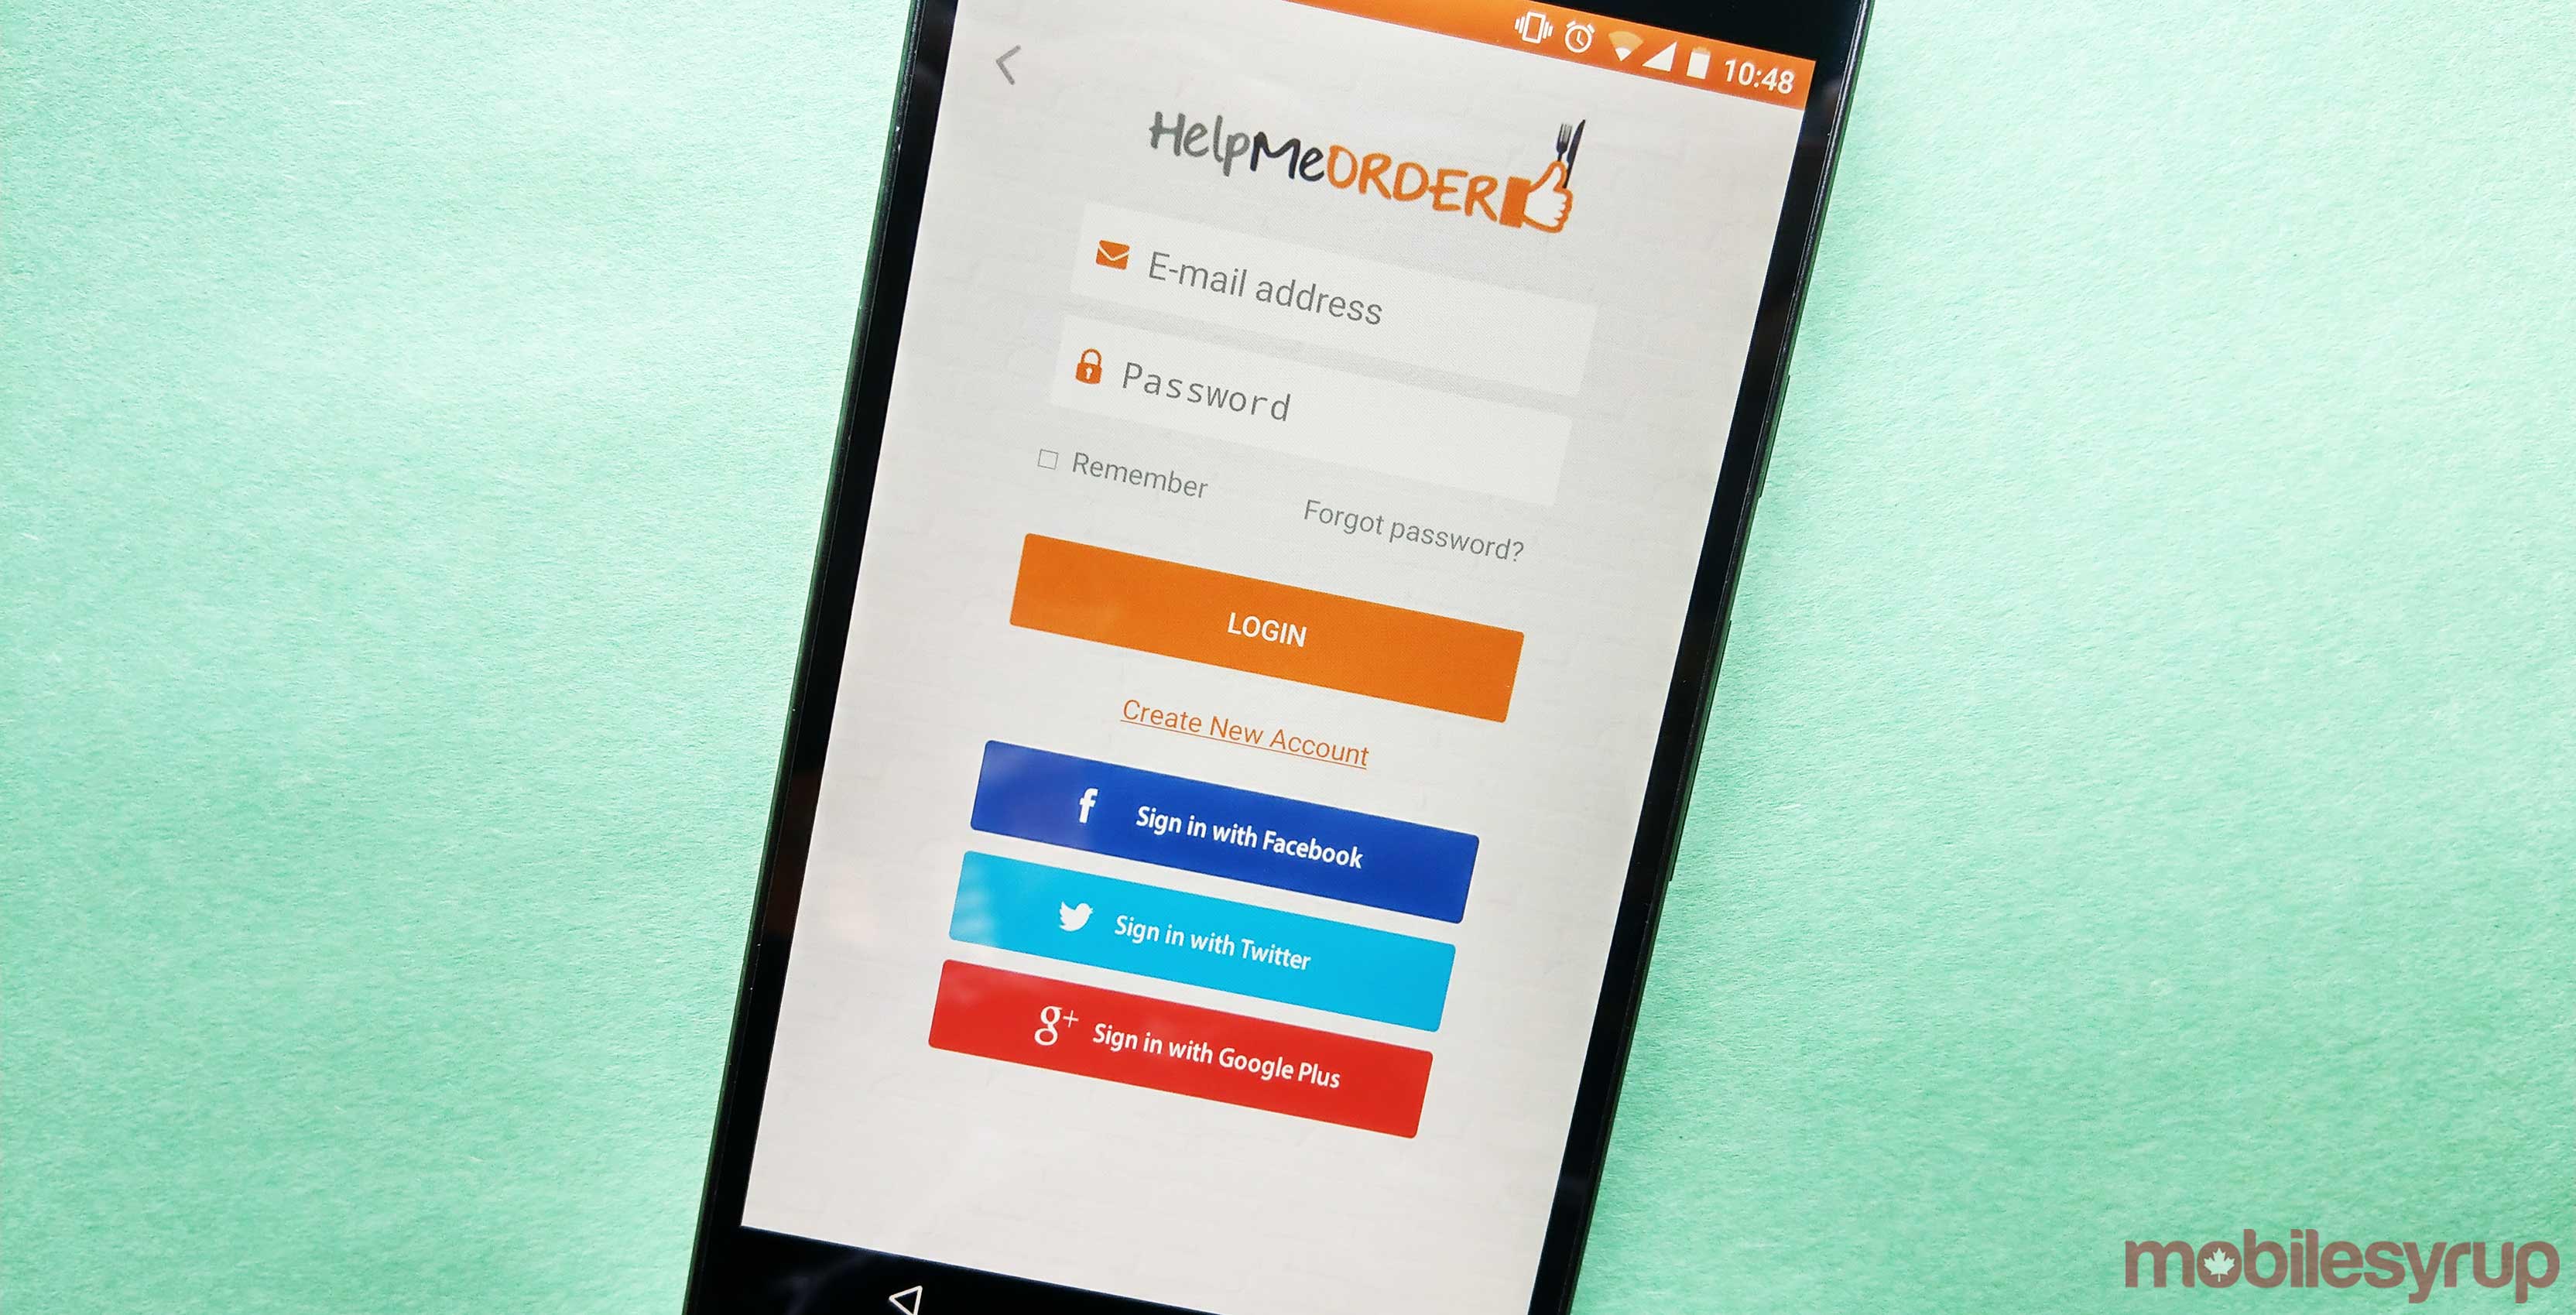 An image showing HelpMeOrder's login page